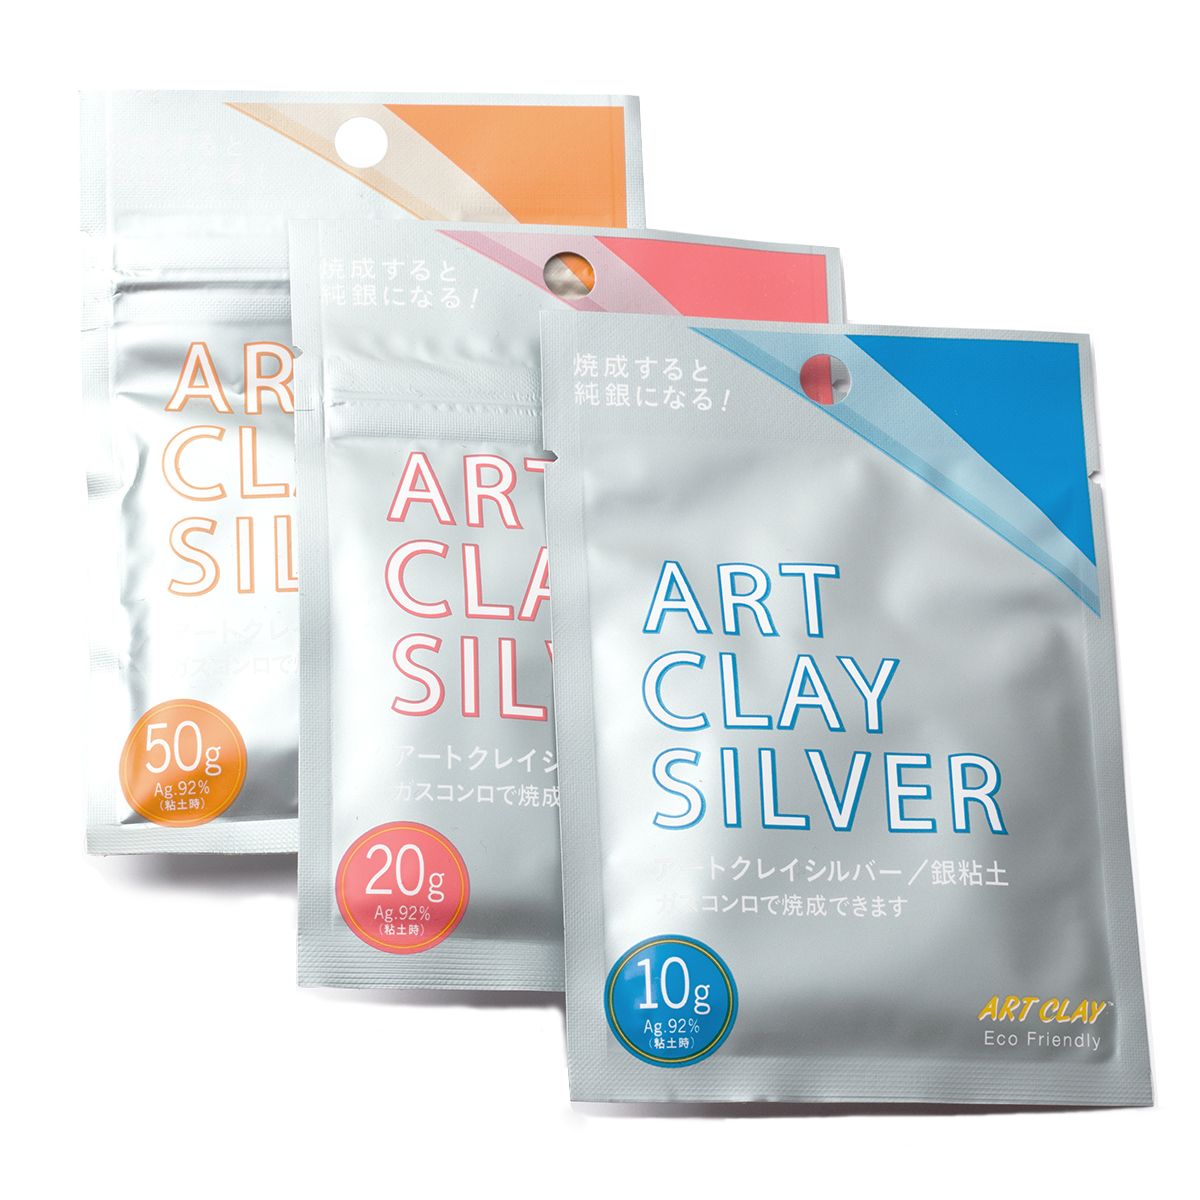 Official Art Clay Silver UK Distributor